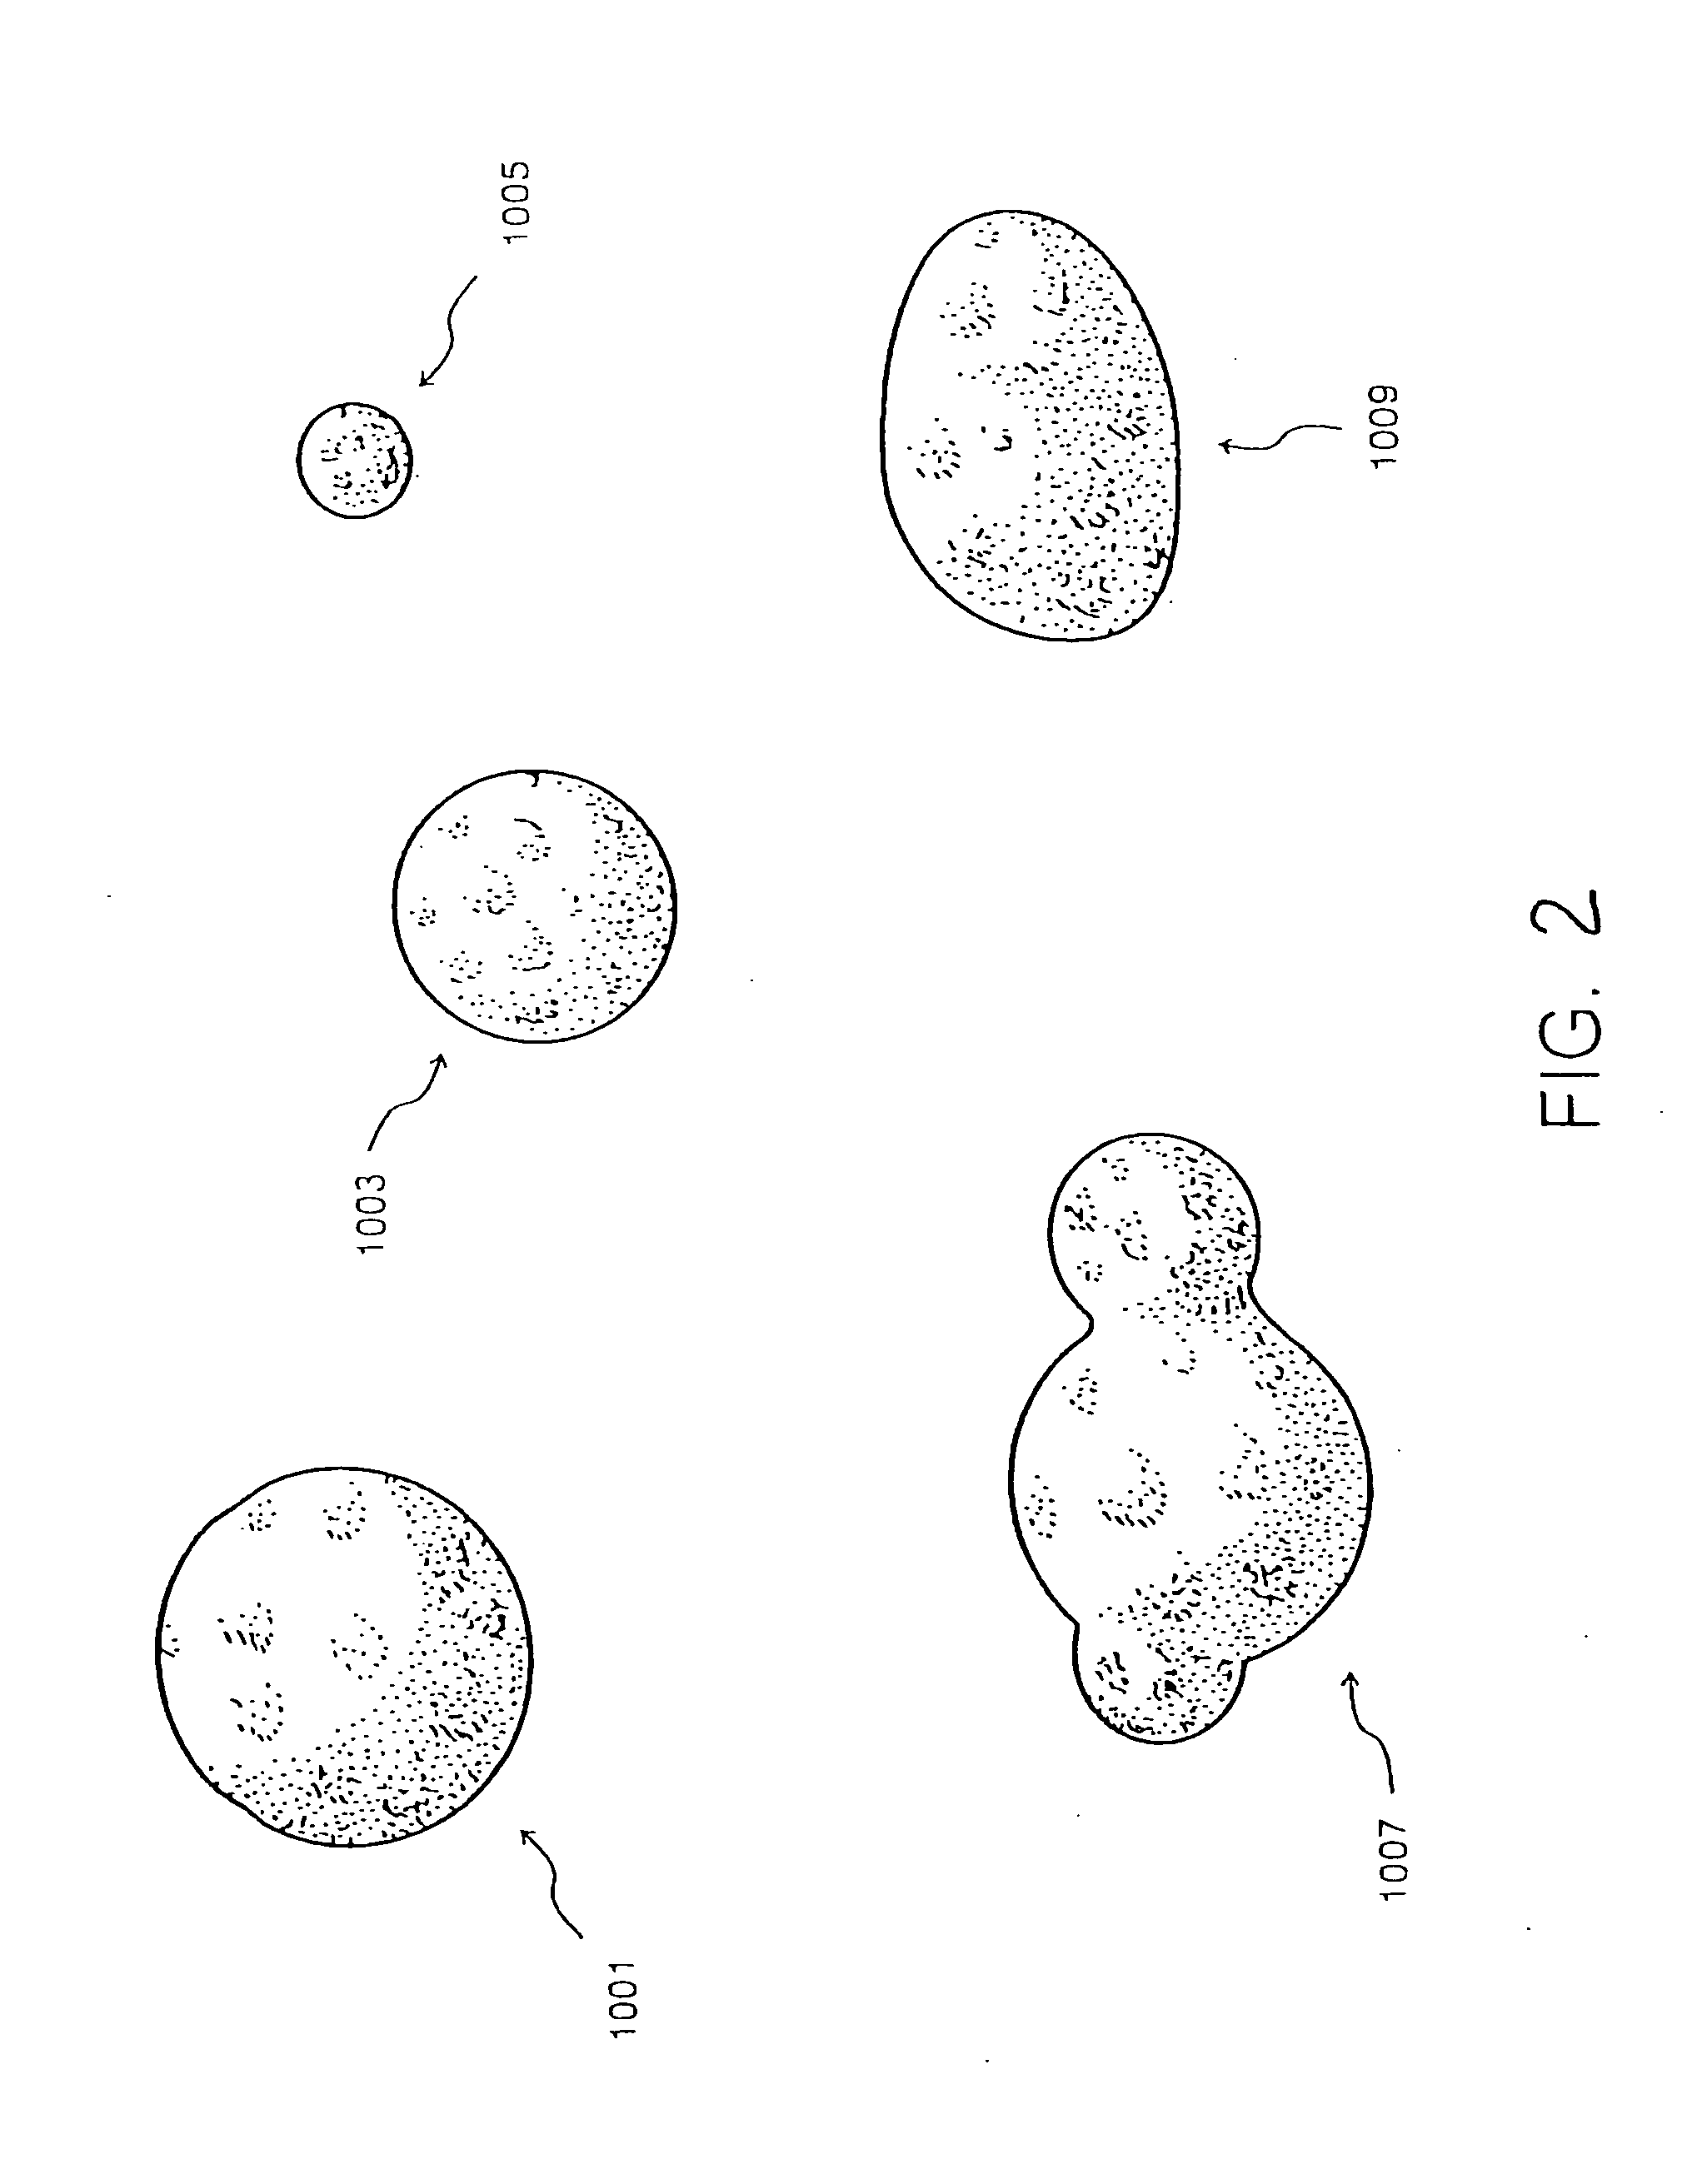 Method and system for flash freezing tea-flavored liquid and making tea-based beverages